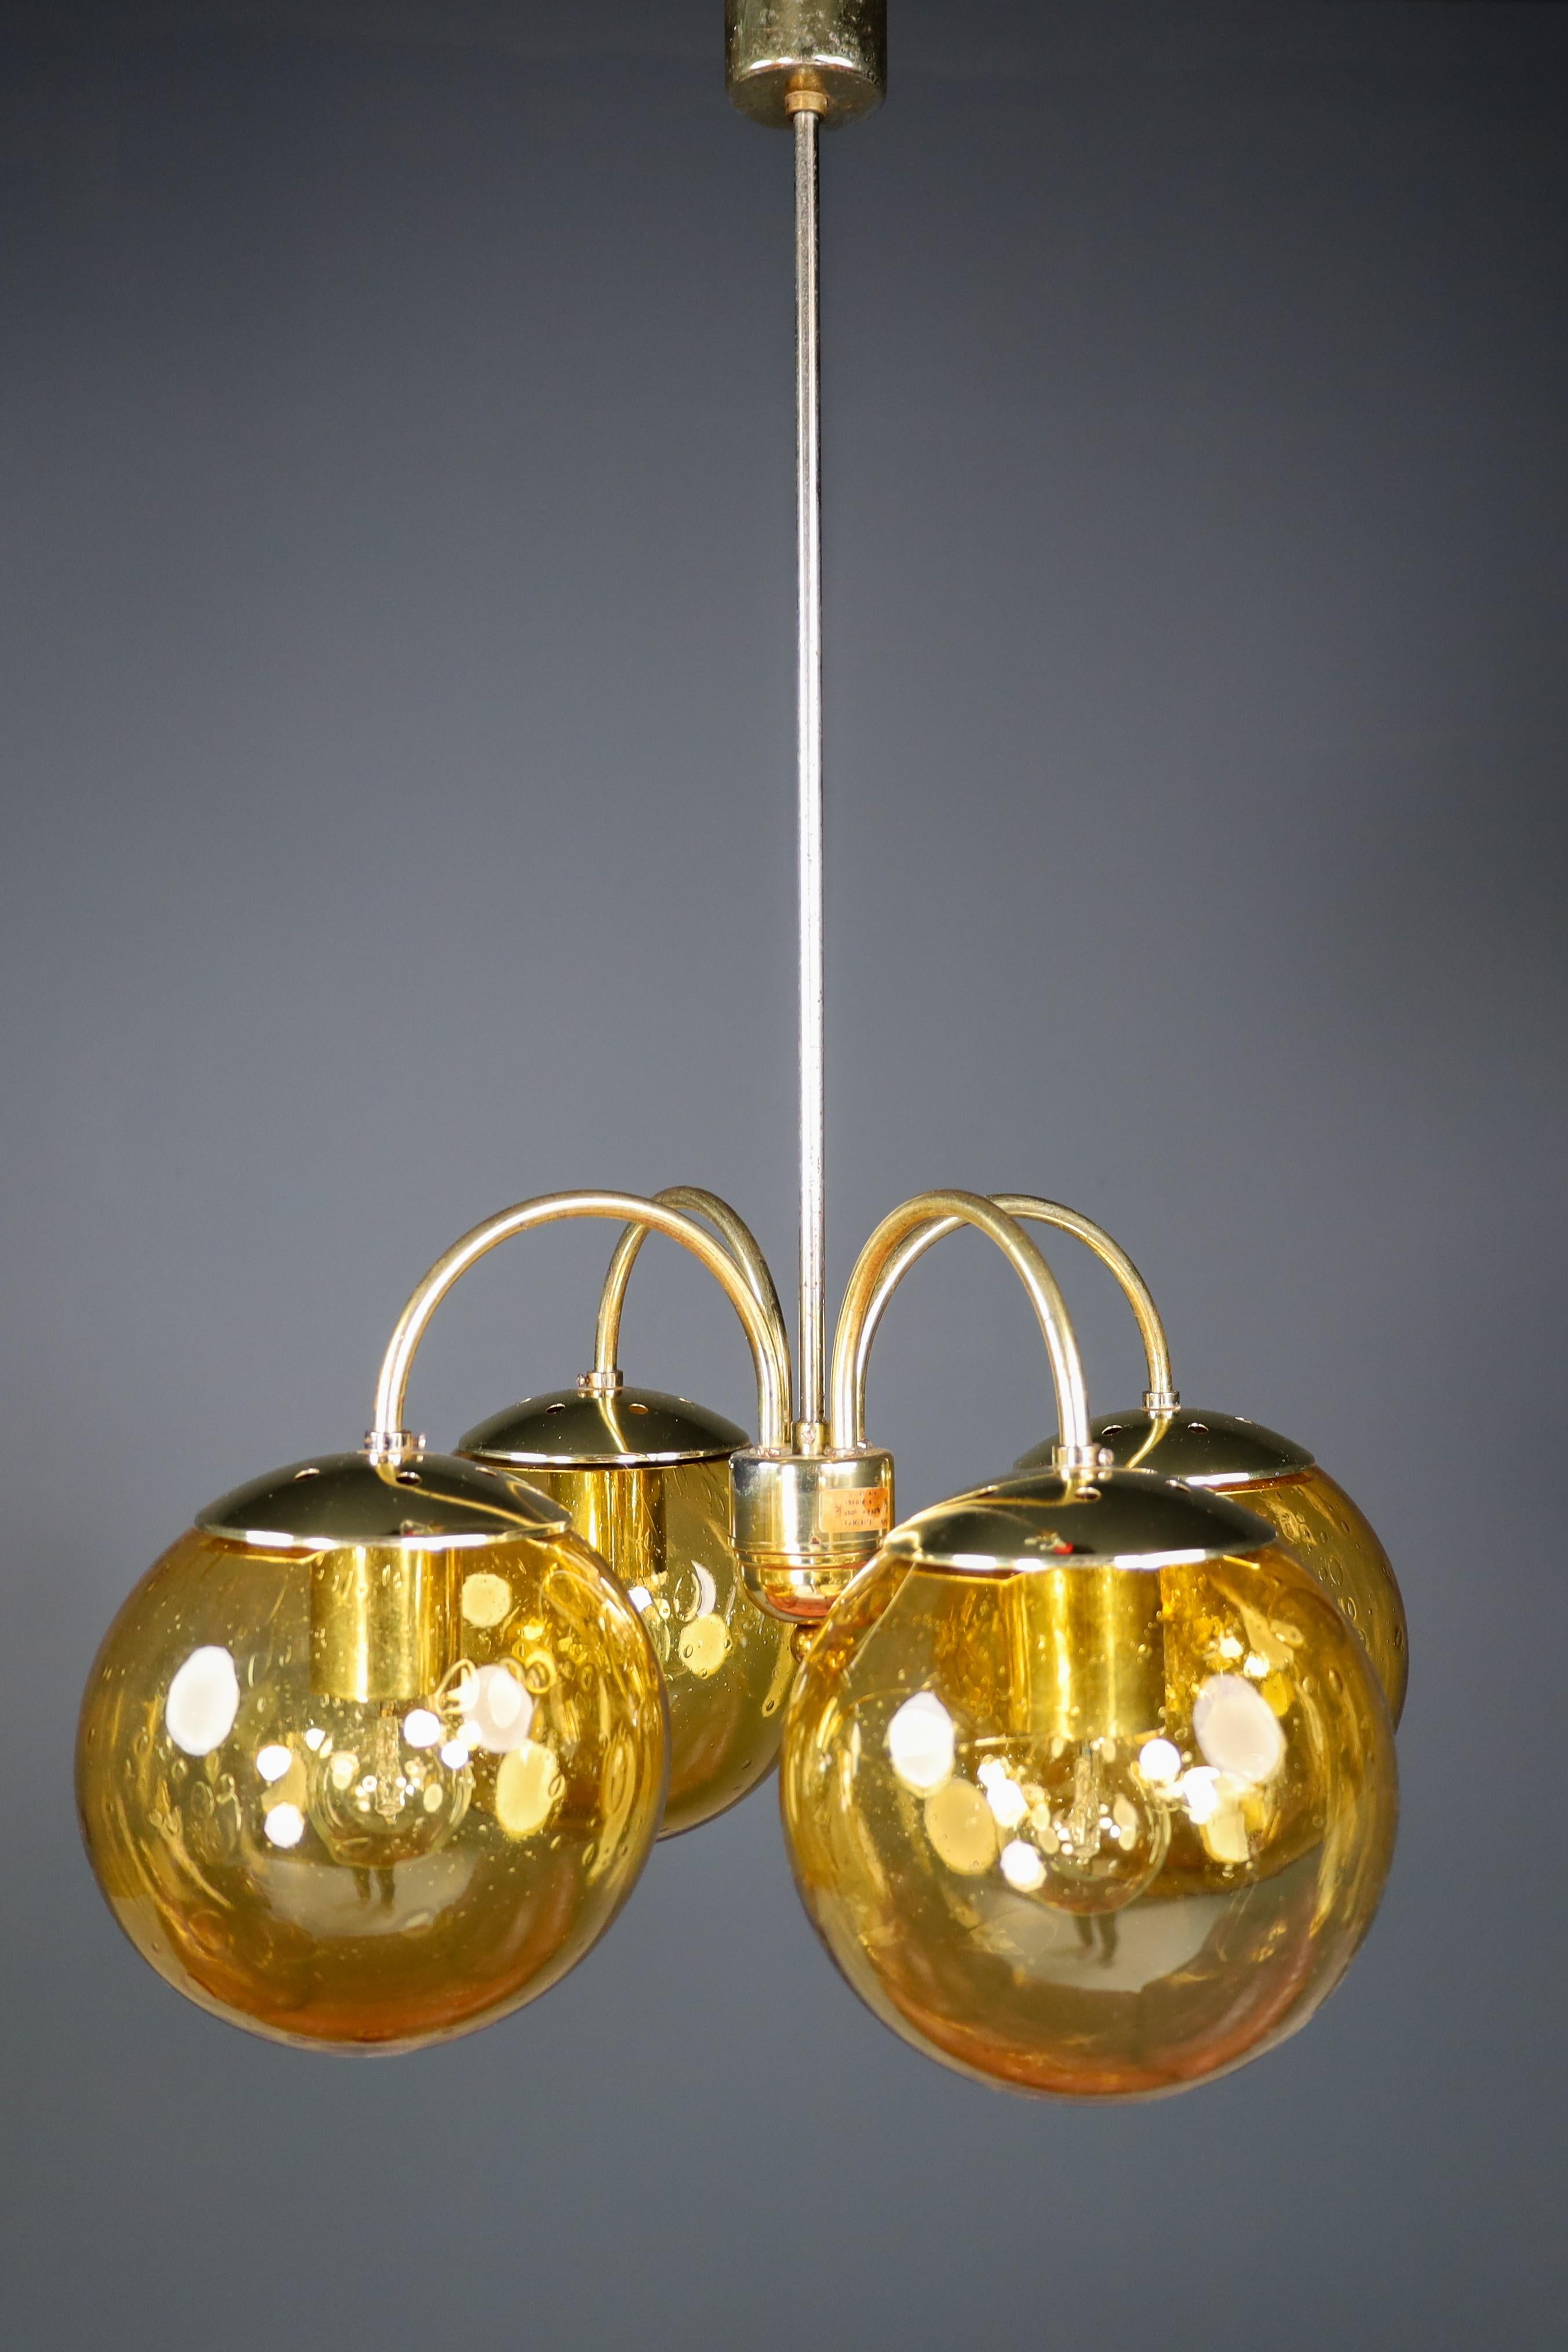 Large Chandelier in Amber Hand Blown Colored Glass Globes & Brass, Europe, 1970s For Sale 2